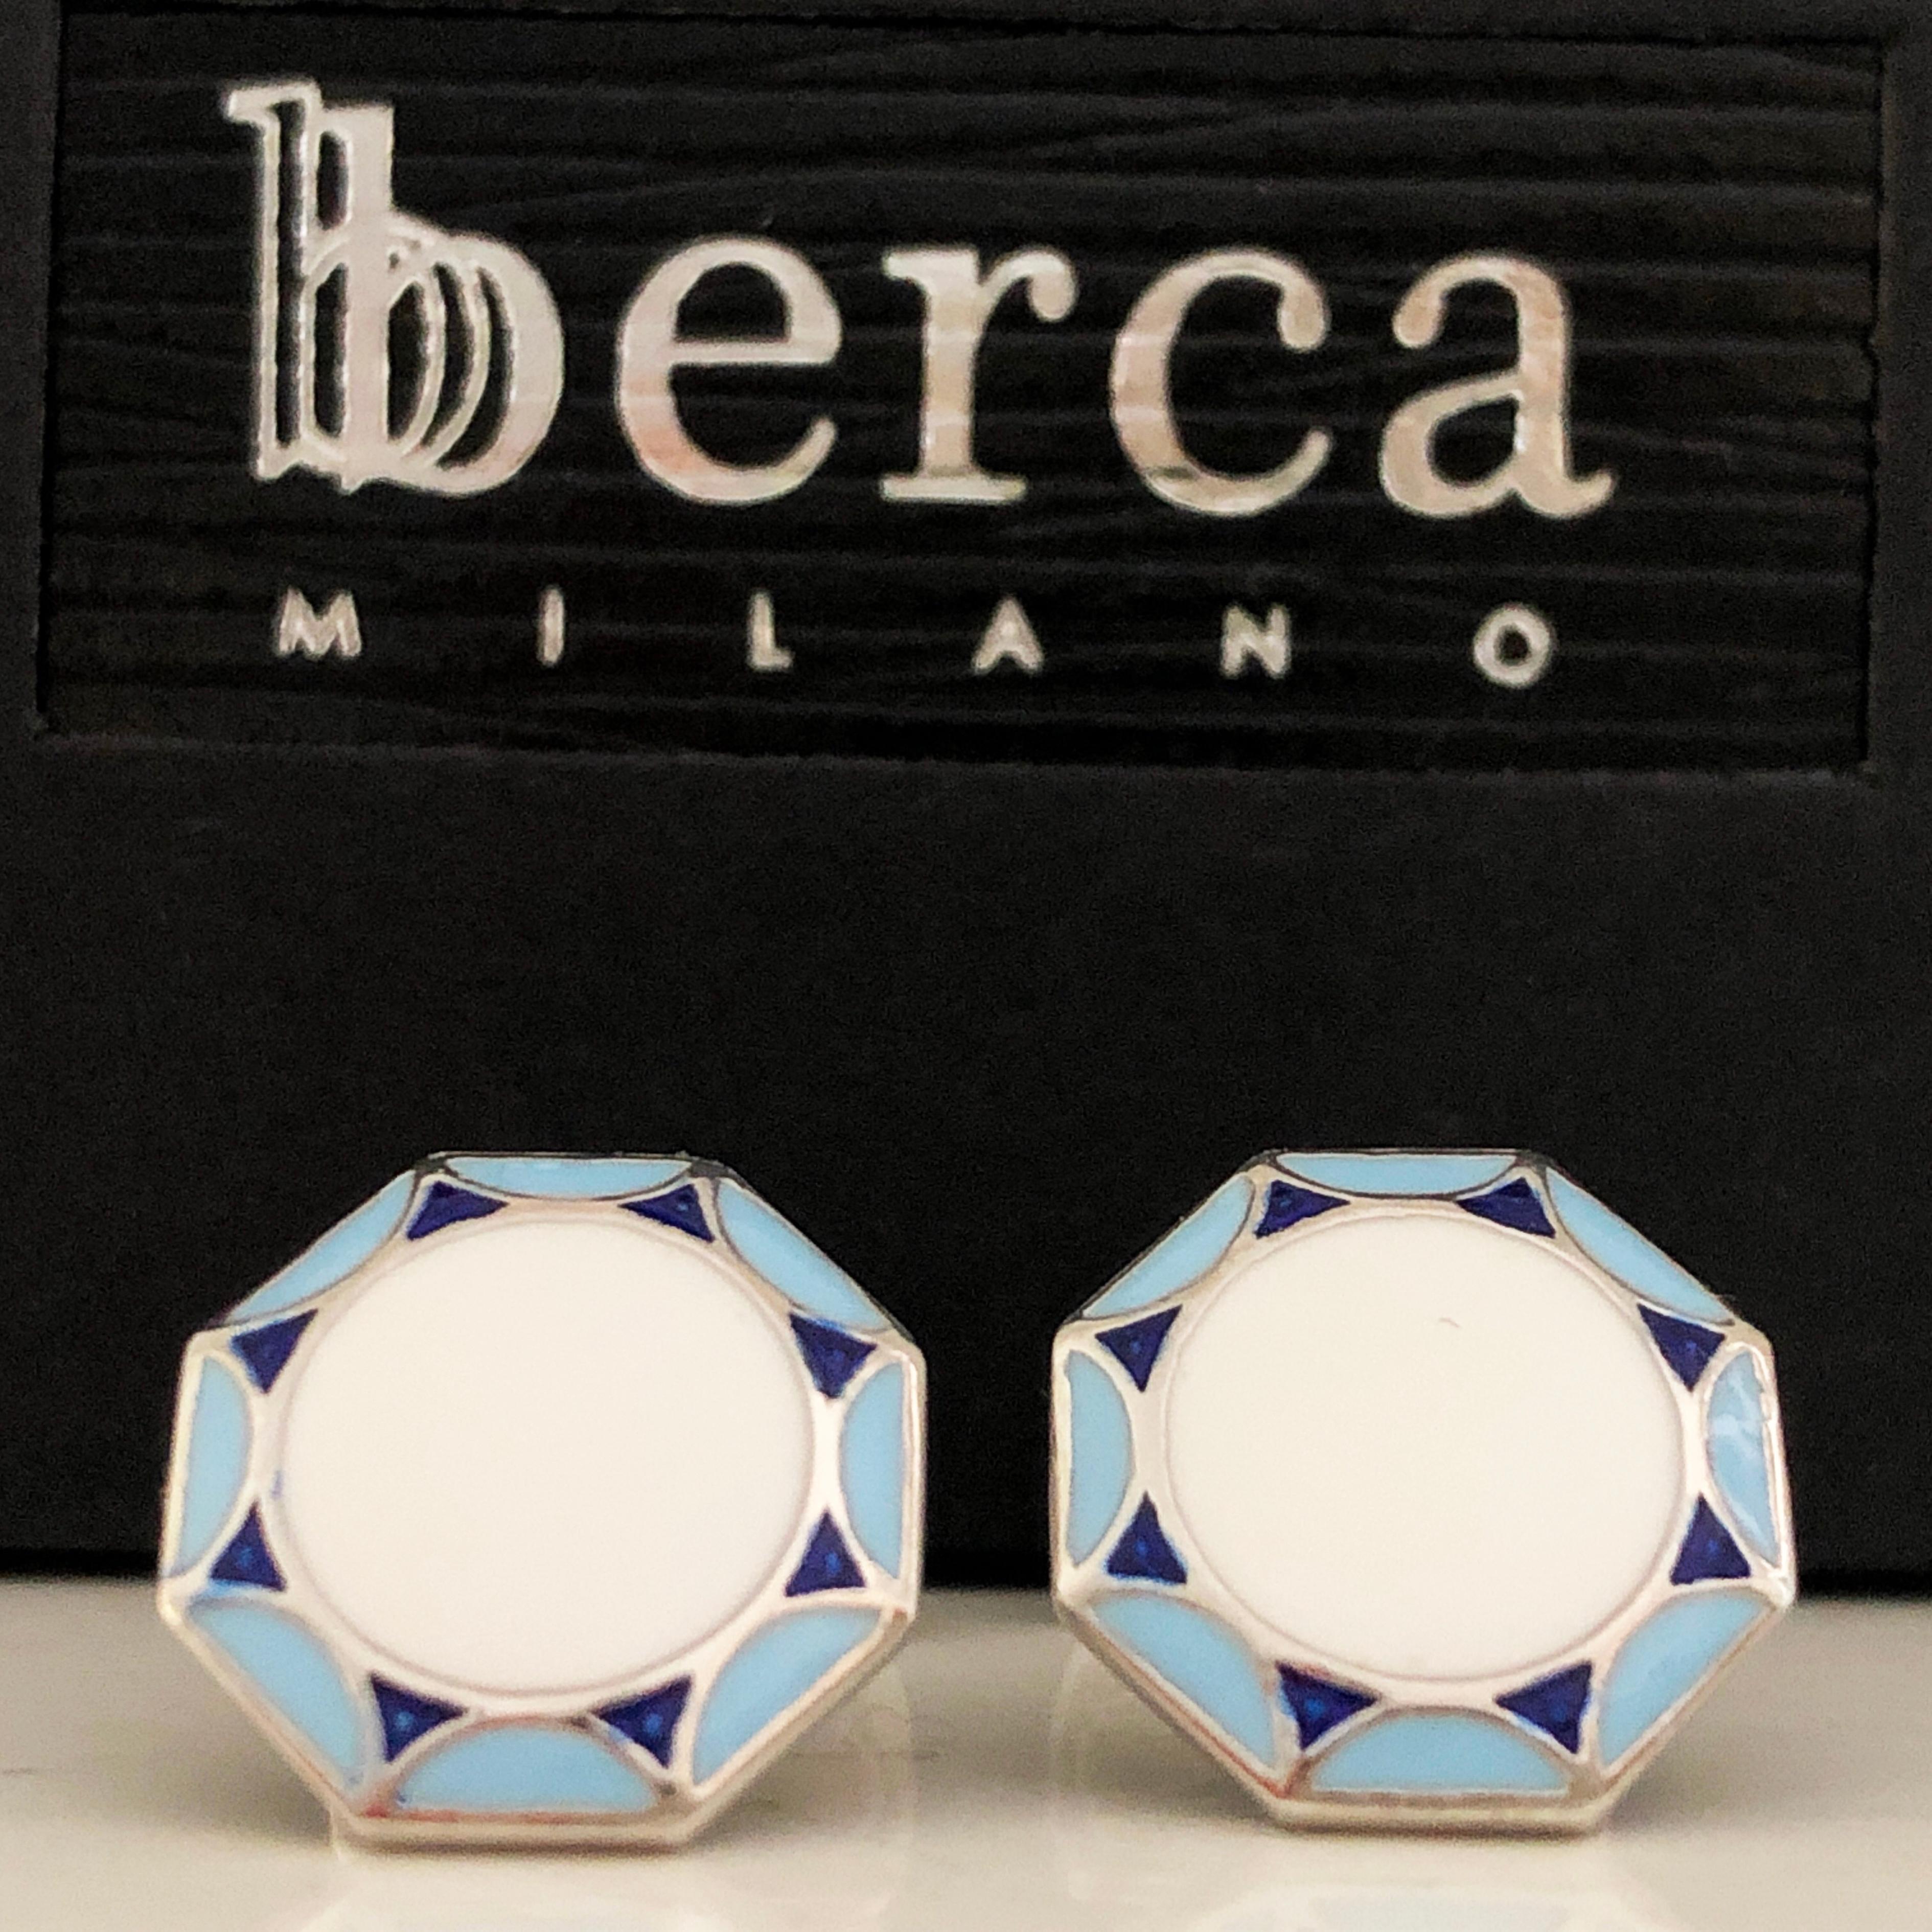 Chic yet Timeless Octagonal White, Light Blue, Navy Blue Hand Enamelled Sterling Silver Cufflinks, T-bar back.
In our Smart Black Box and Pouch.

Front Diameter about 0.55 inches.